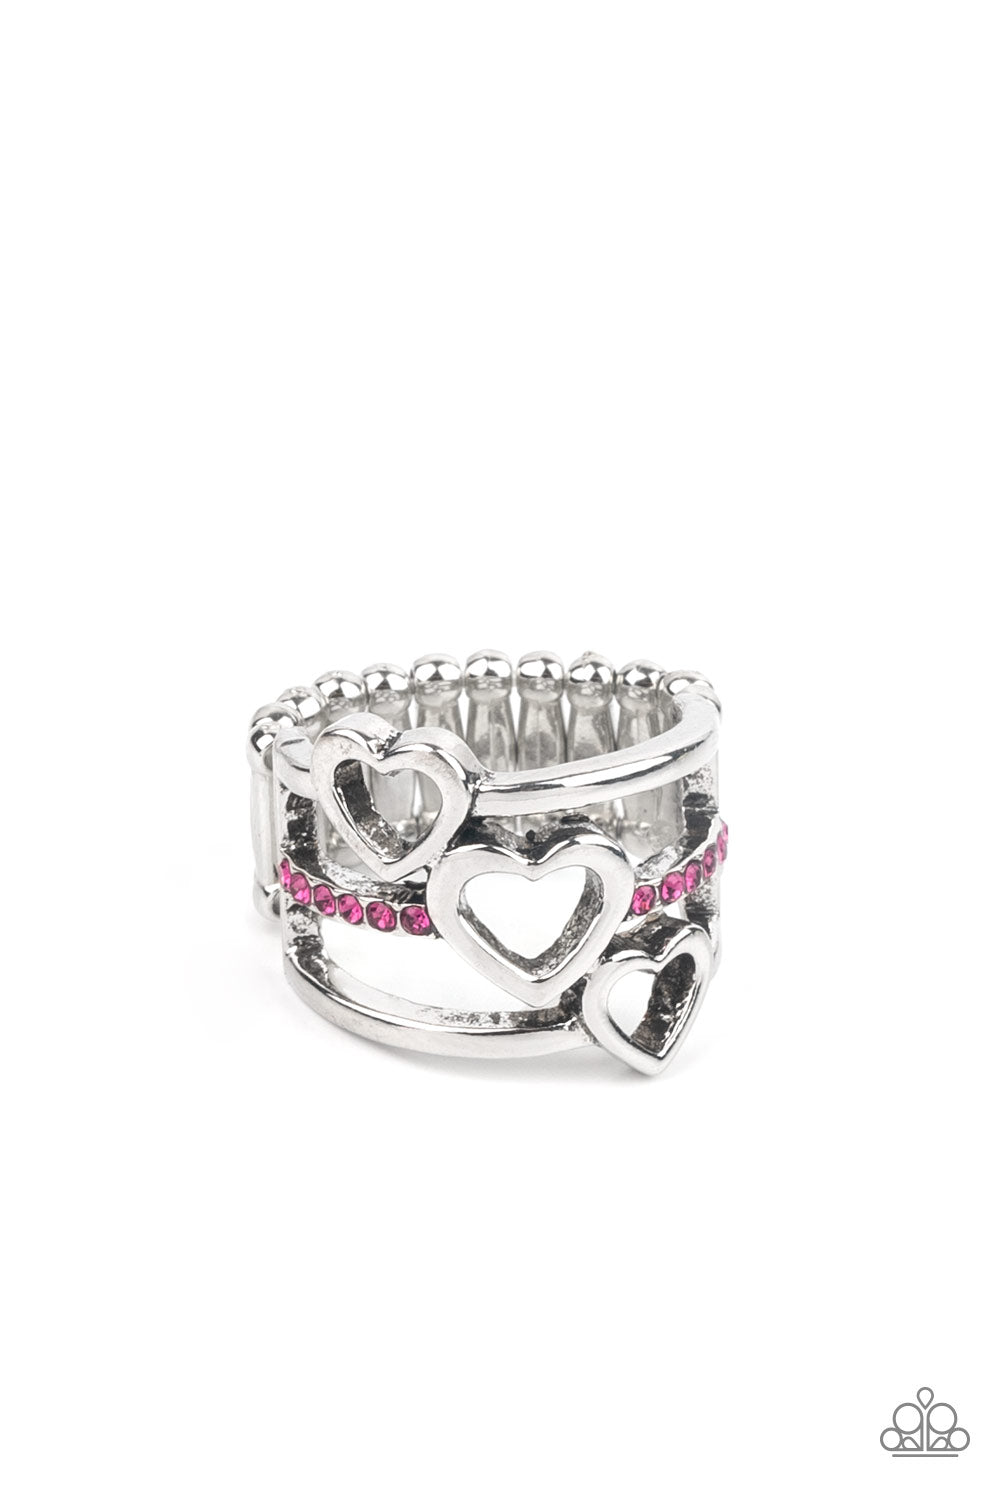 PRE-ORDER - Paparazzi Give Me AMOR - Pink - Ring - $5 Jewelry with Ashley Swint